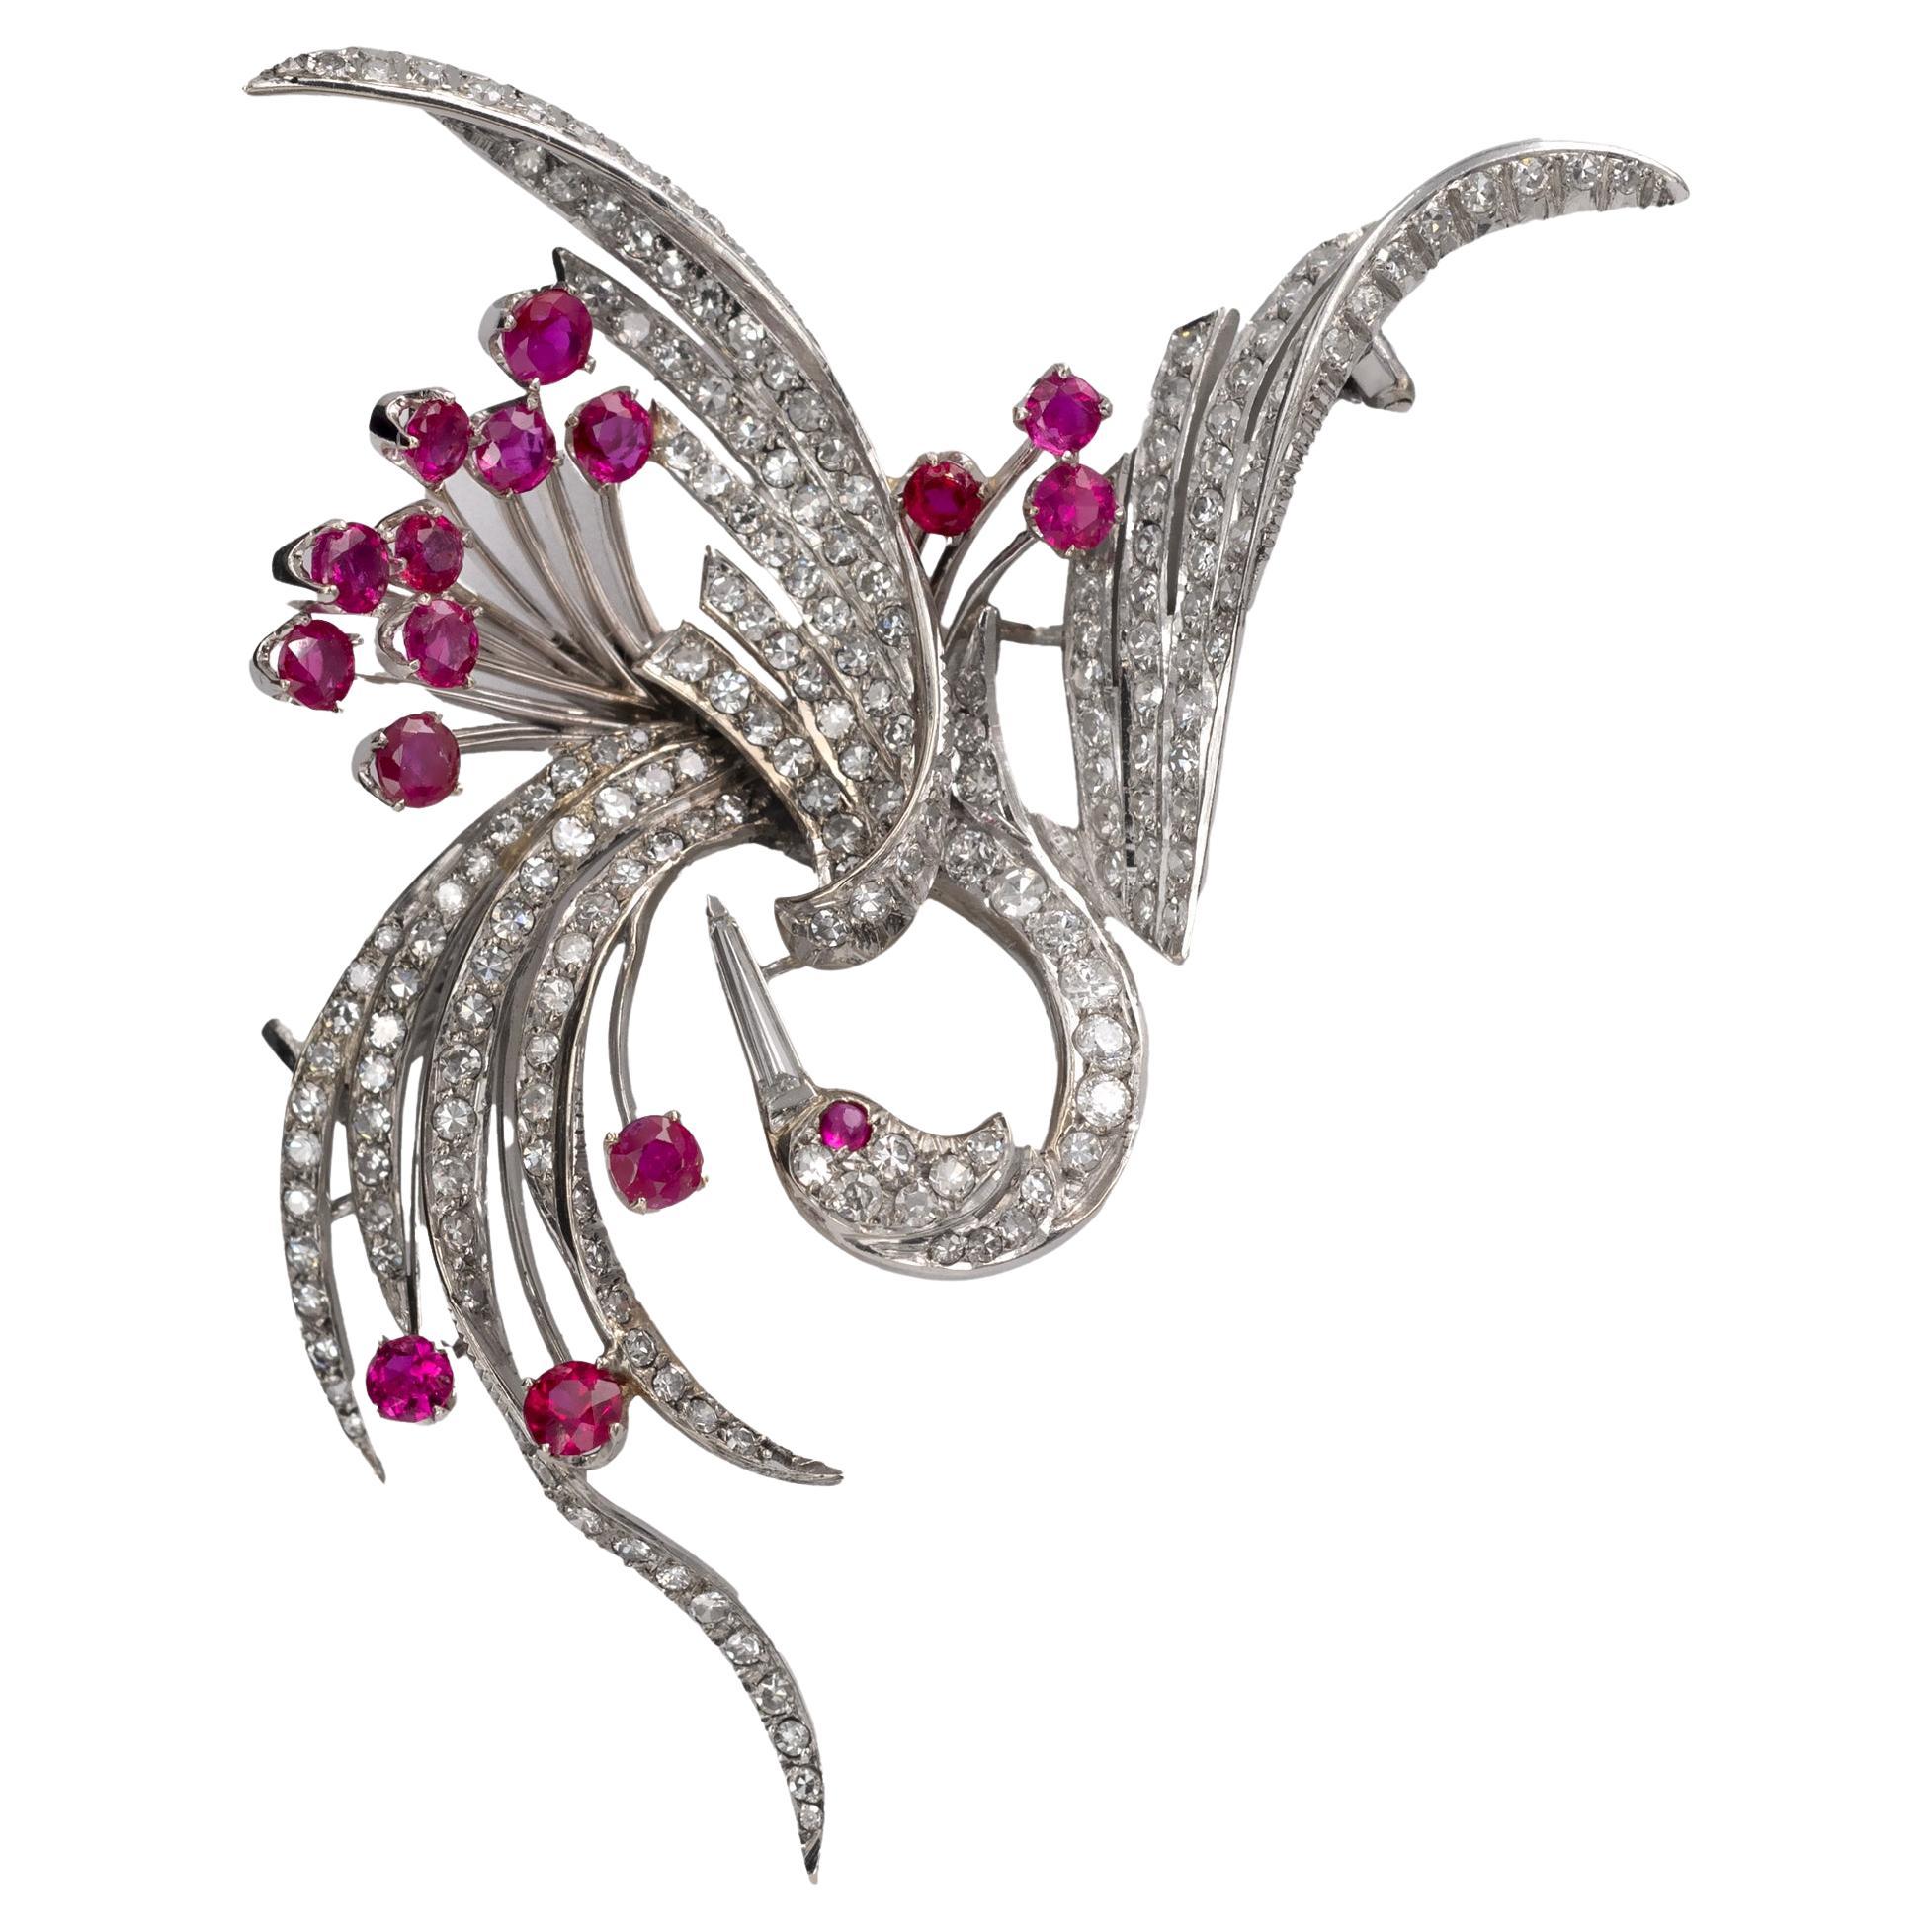 Mid-20th Century White Gold Bird Brooch with Pavé Diamonds and Ruby Accents